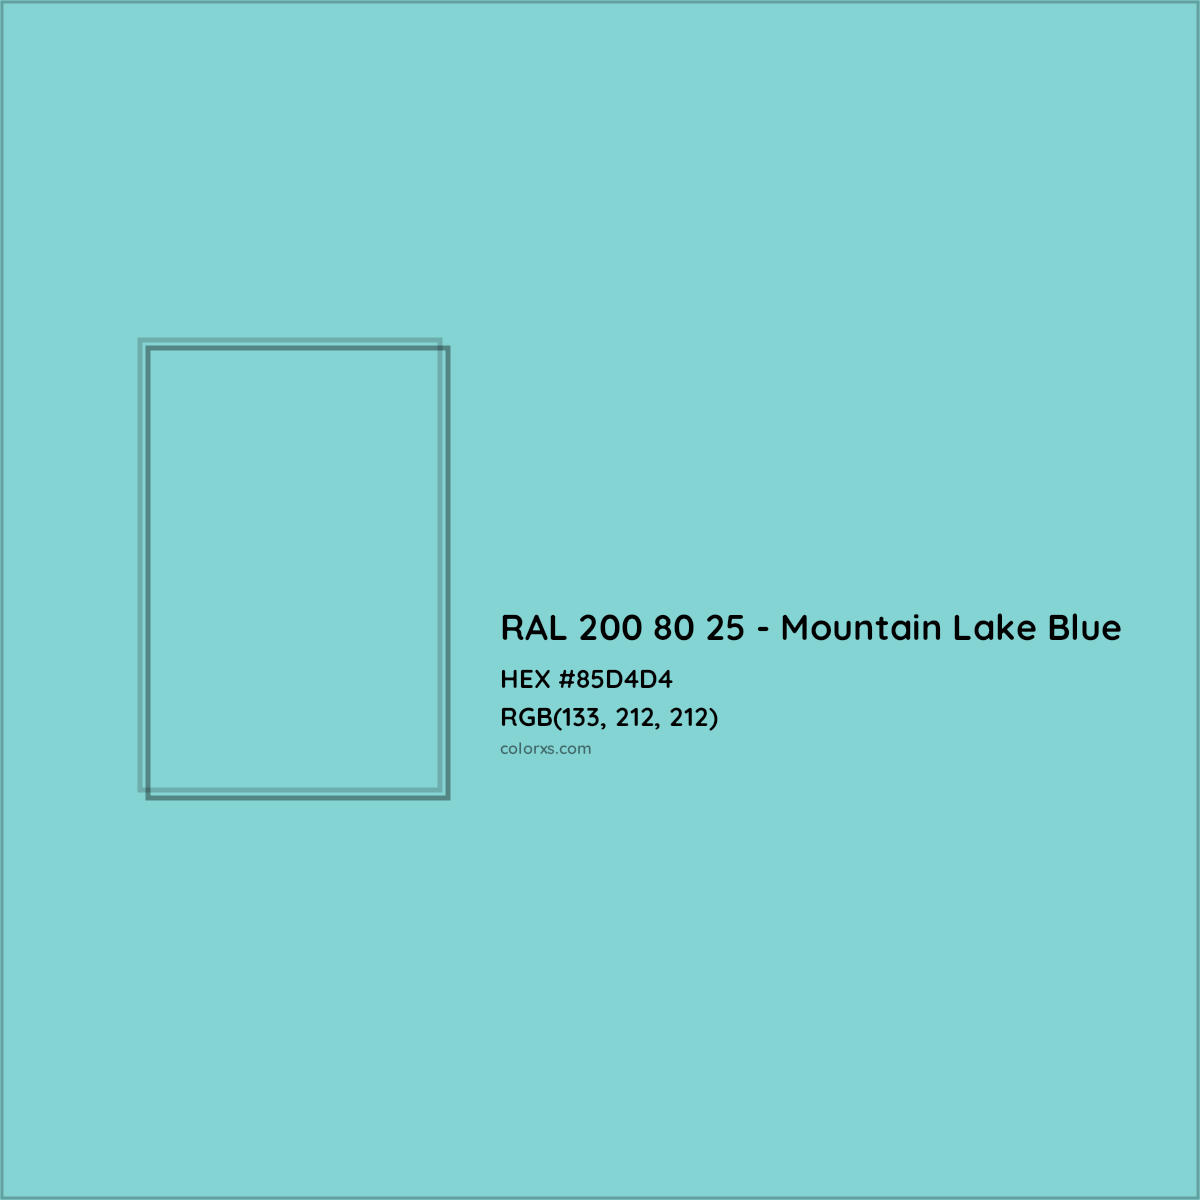 HEX #85D4D4 RAL 200 80 25 - Mountain Lake Blue CMS RAL Design - Color Code